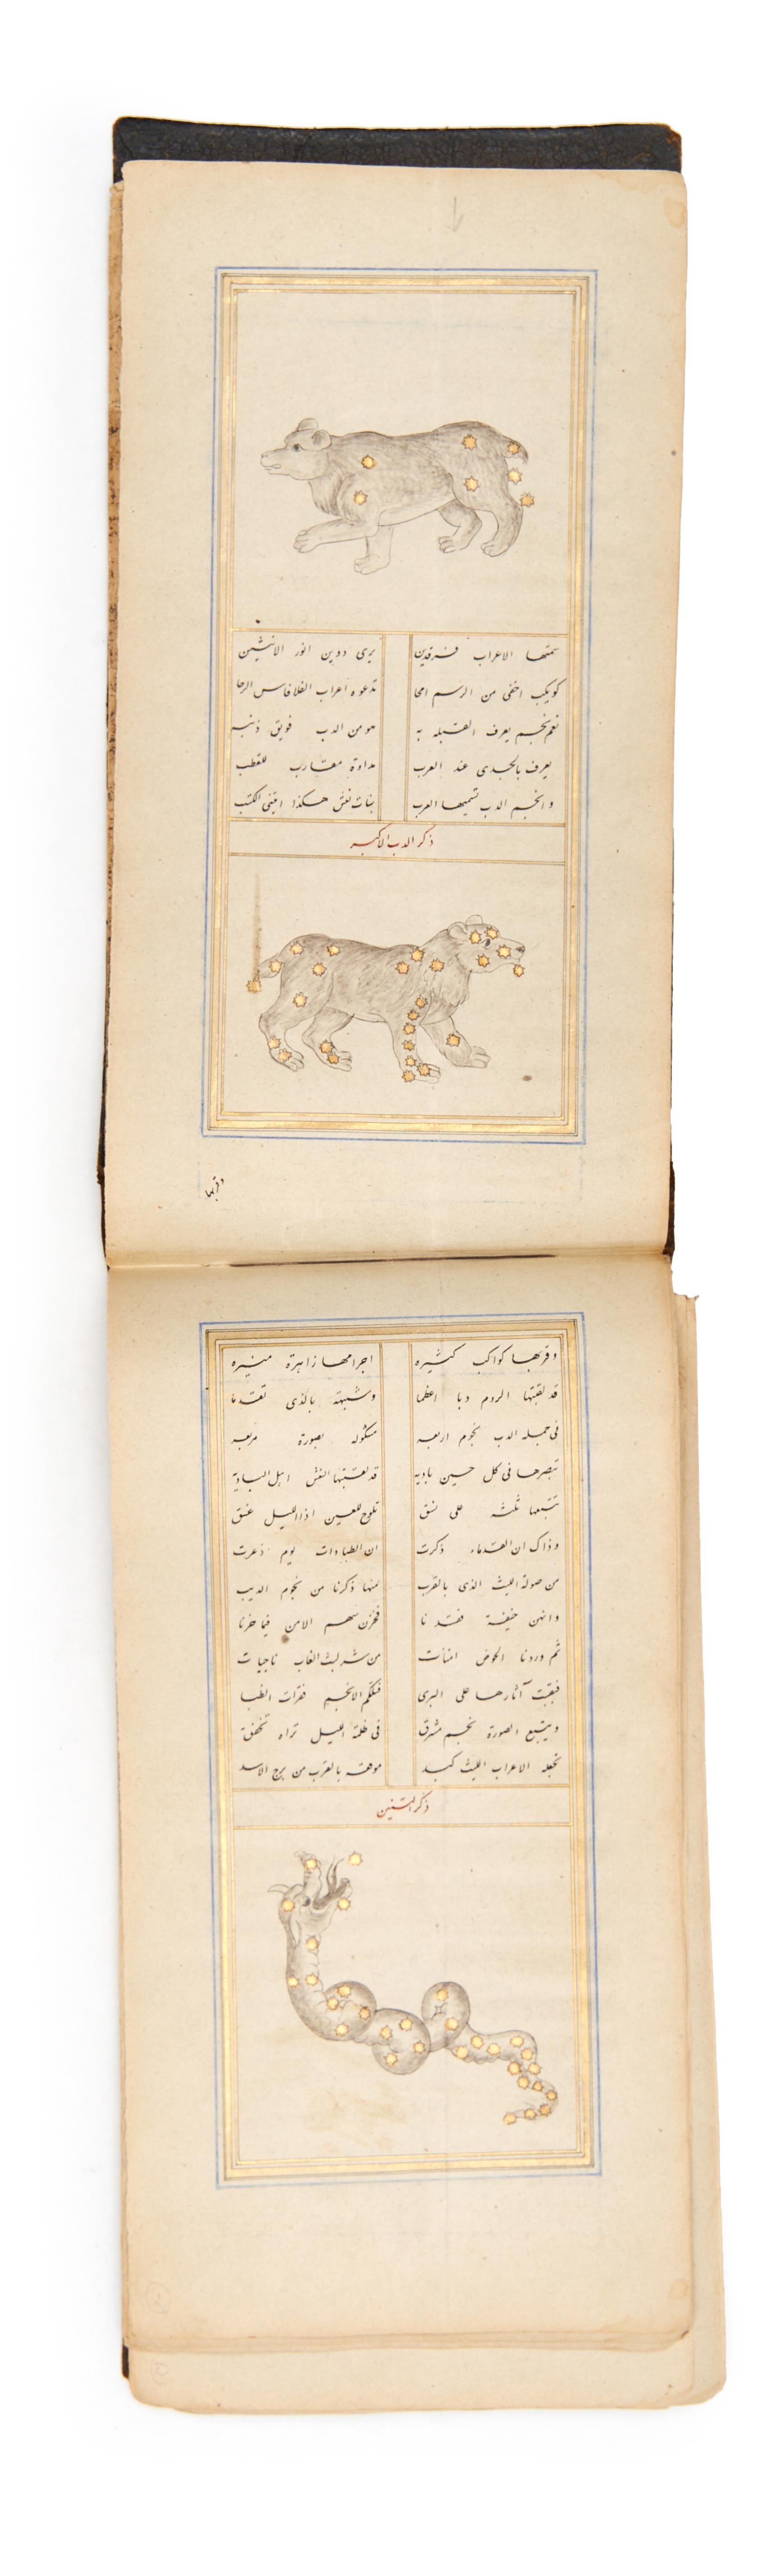 A RARE ILLUMINATED & ILLUSTRATED PERSIAN POETRY BOOK, ABD AL RAHMAN IN SUFI TEXT, LATE 17TH/ EARLY - Image 32 of 34